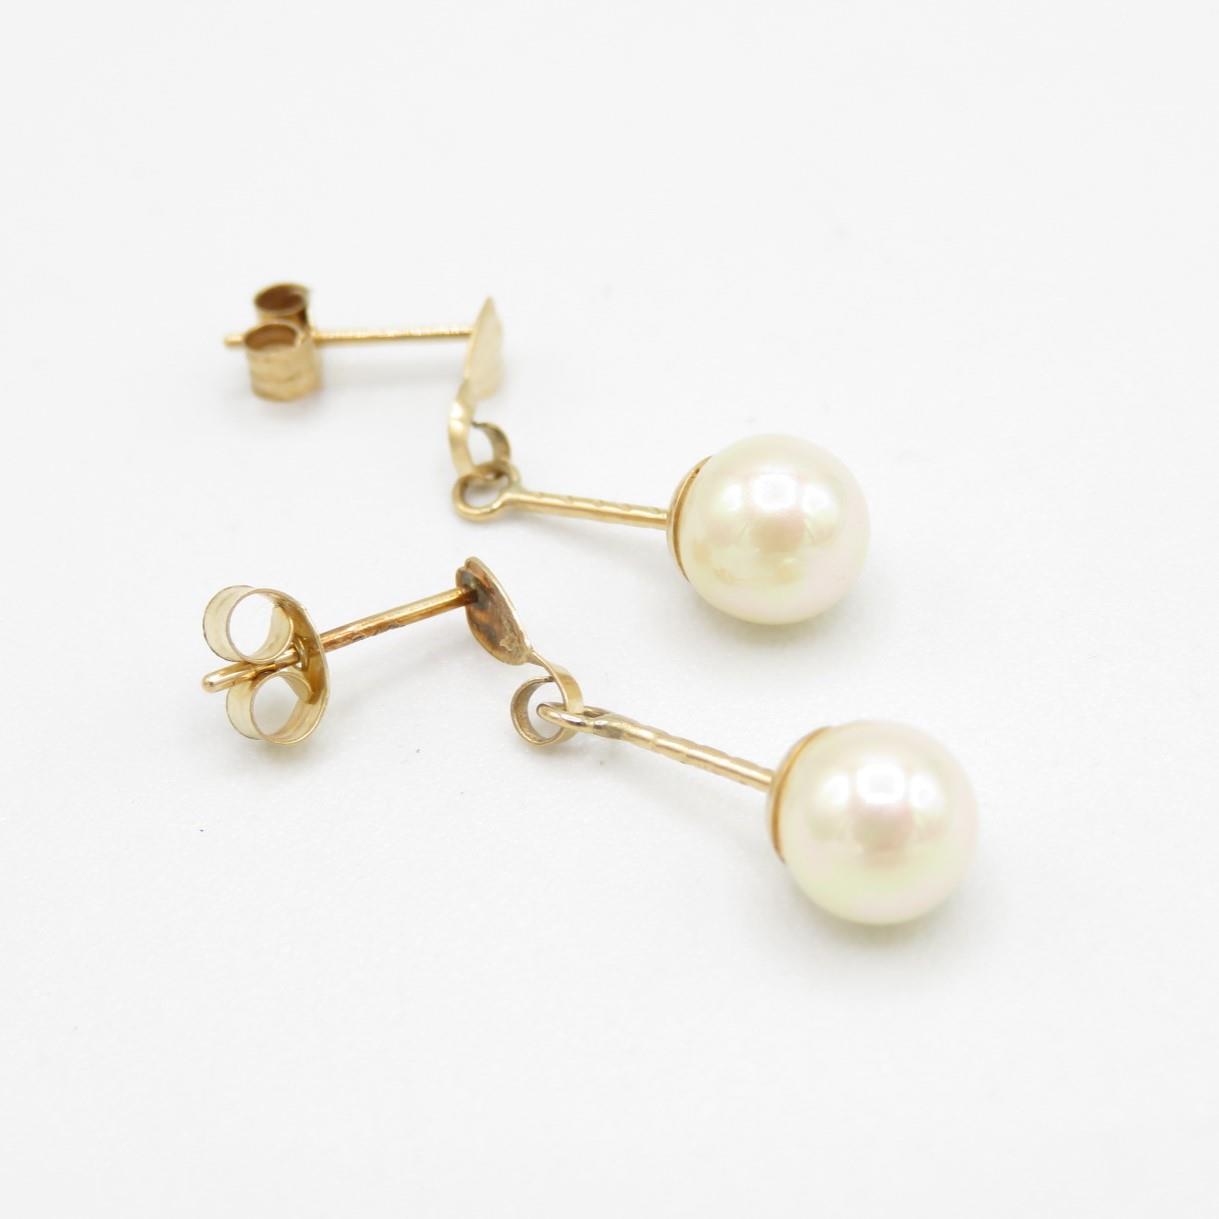 Pair of 9ct gold and pearl drop earrings 0.5g - Image 2 of 3